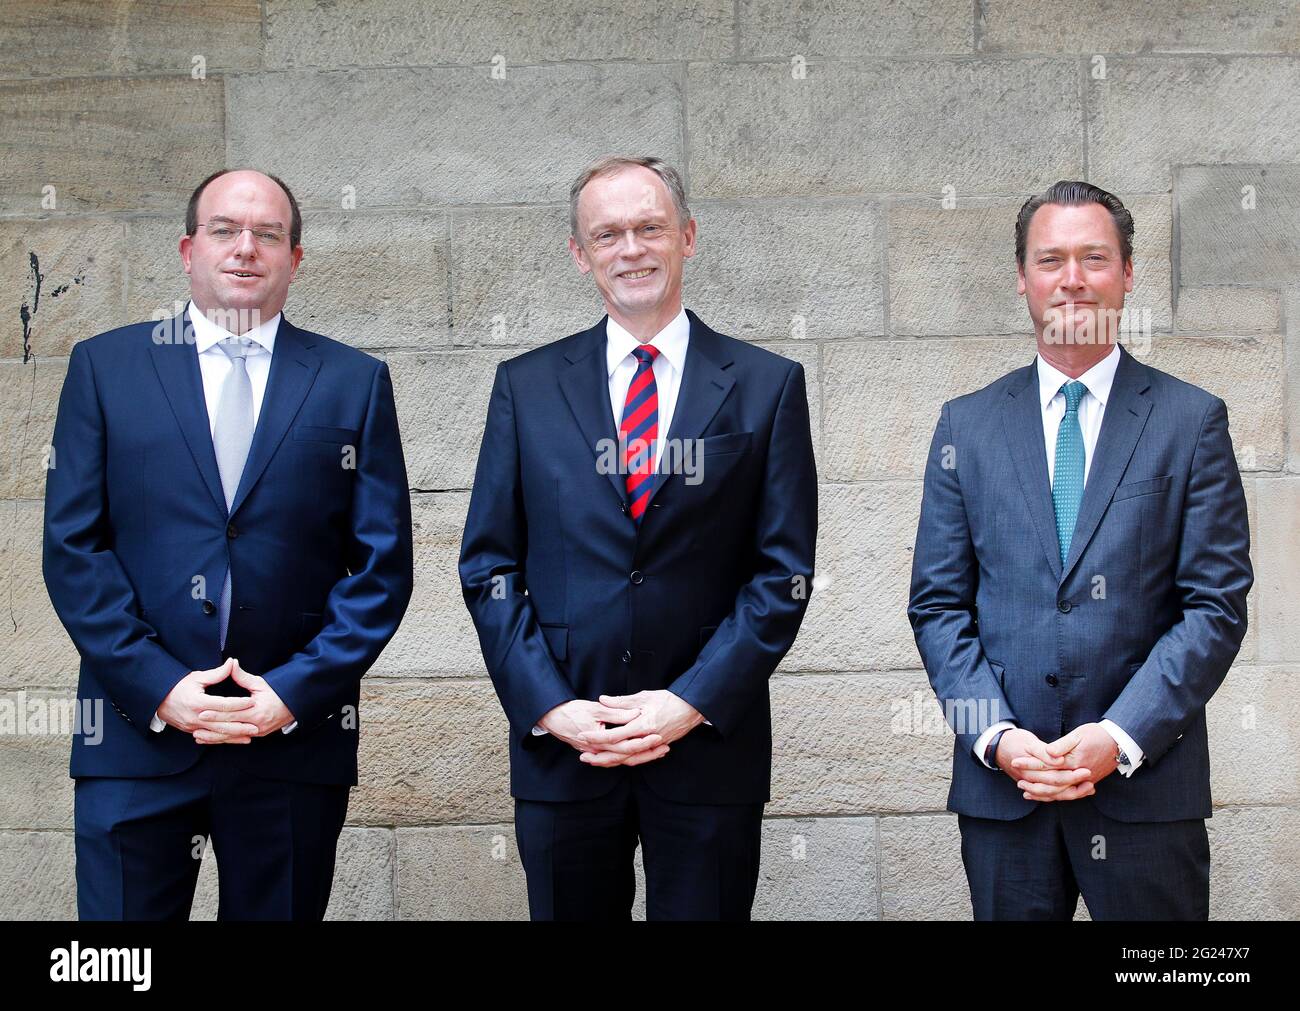 Duisburg, Germany. 08th June, 2021. Hendrik Schulte (center), Chairman of the Supervisory Board of Duisburger Hafen AG, introduces Markus Bangen (right), who will become the new Chief Executive Officer of Duisburger Hafen AG at the end of the year, and the new member of the Executive Board, Carsten Hinne. Credit: Roland Weihrauch/dpa/Alamy Live News Stock Photo